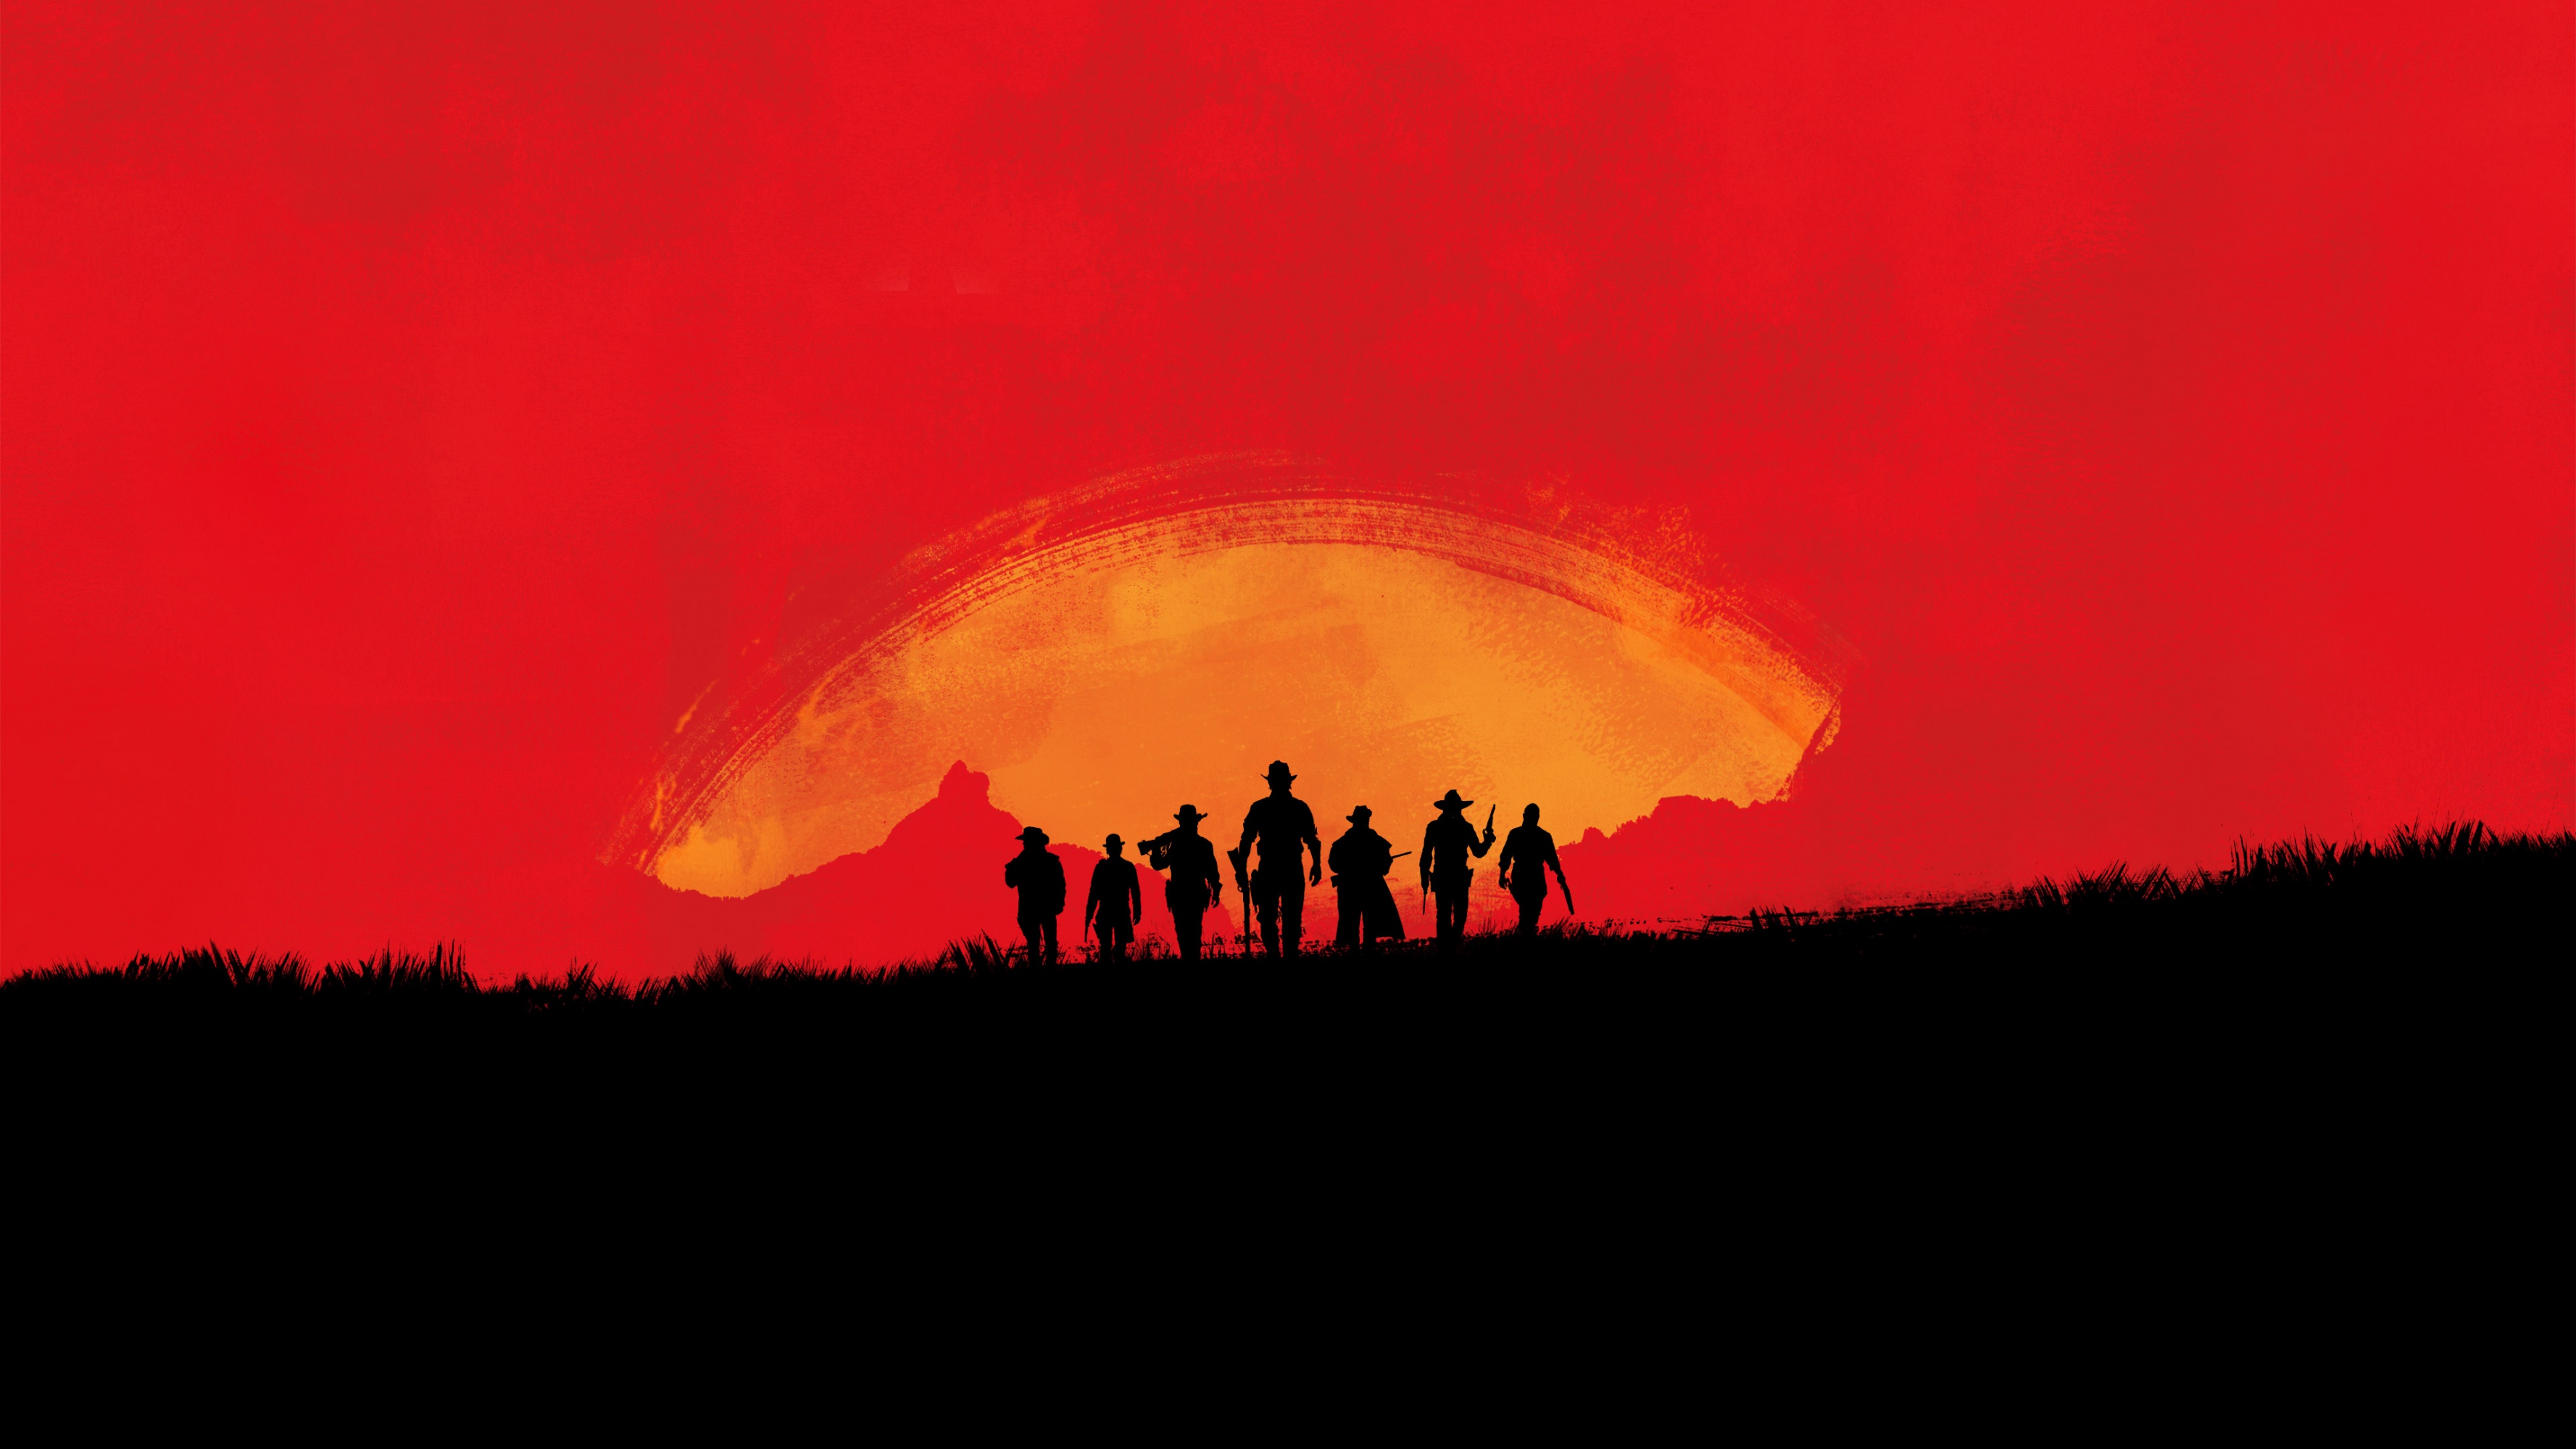 hd red dead redemption 2